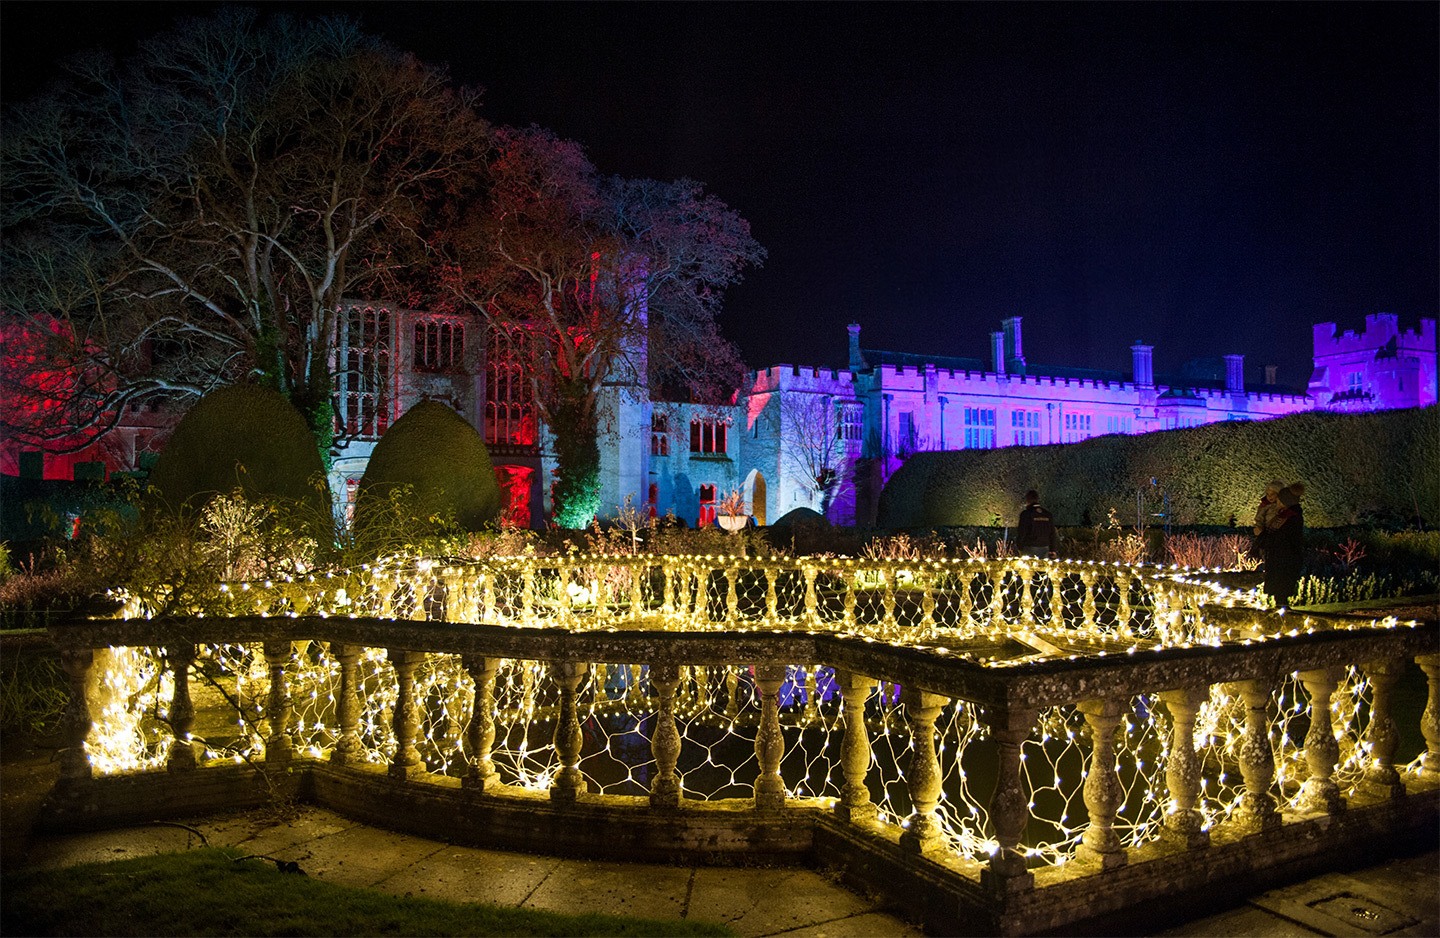 The Spectacle of Light at Sudeley Castle